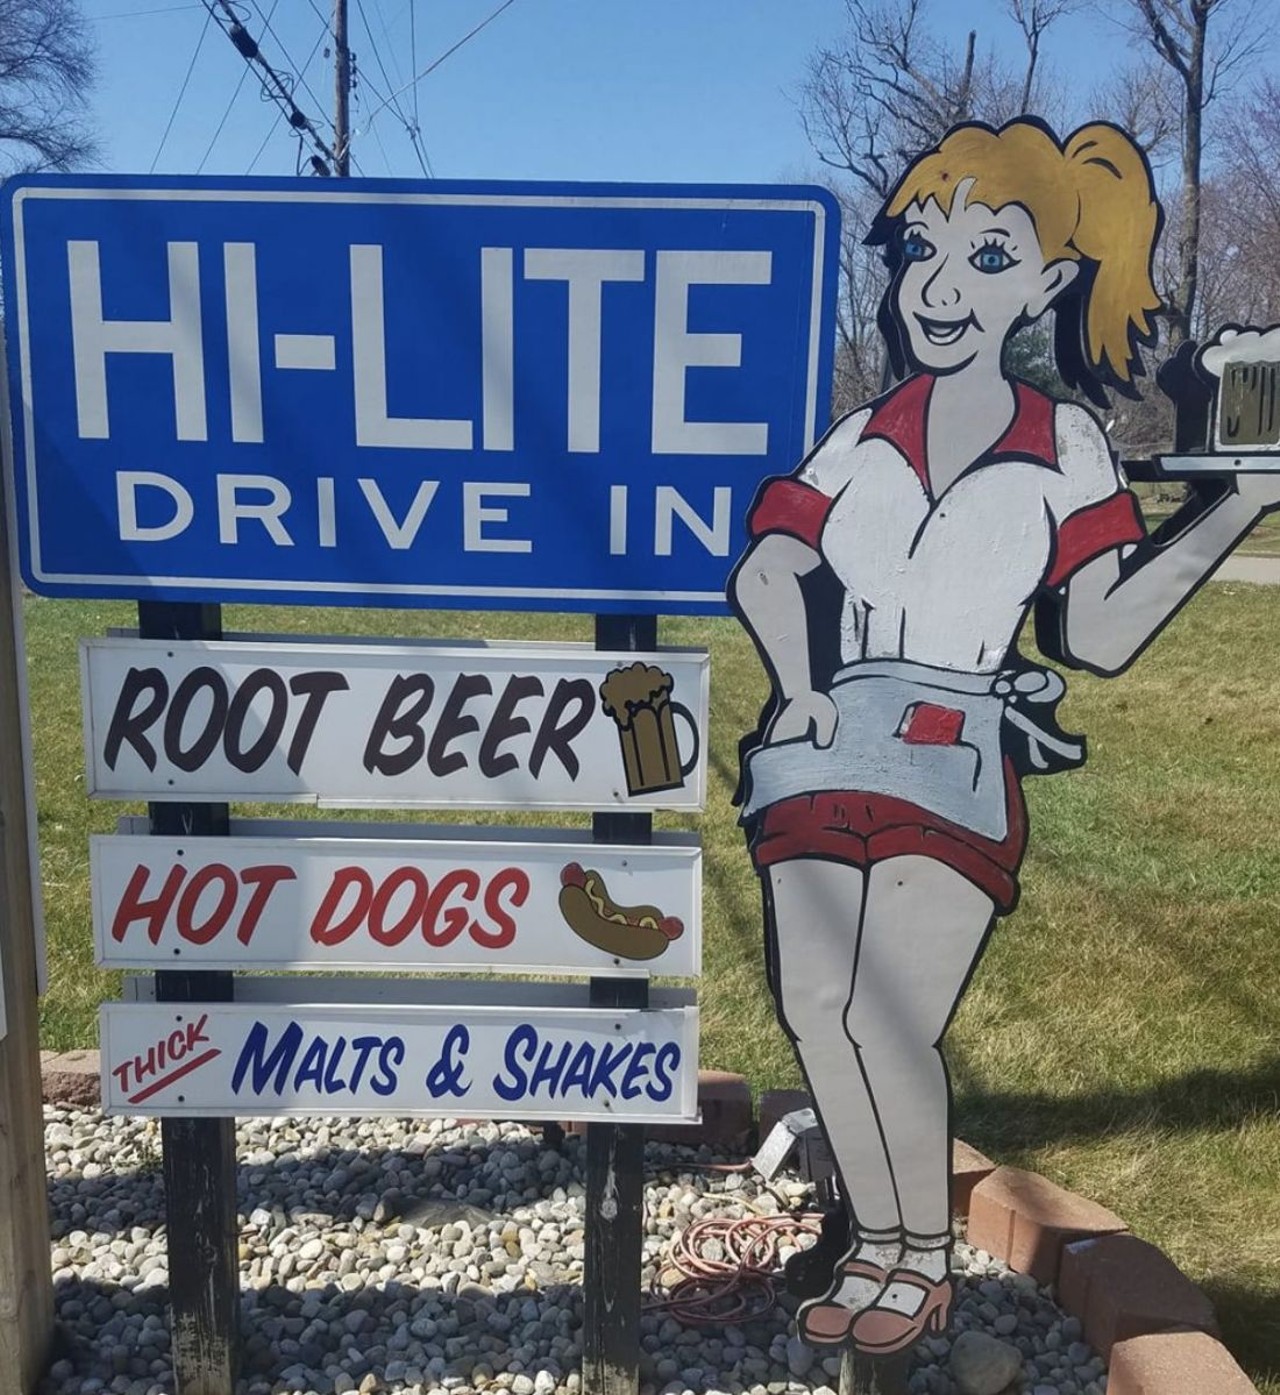 Hi Lite Drive-In  
1005 E Michigan Ave, Marshall; 269-781-8848
The super long burger and hot dog menus, the sloppy joe&#146;s, and the chicken dinner all look nice, but how about that dessert menu? You couldn&#146;t be blamed for skipping straight to the classic '50&#146;s-era diner&#146;s malt and homemade root beer float offerings.
Photo via Facebook  